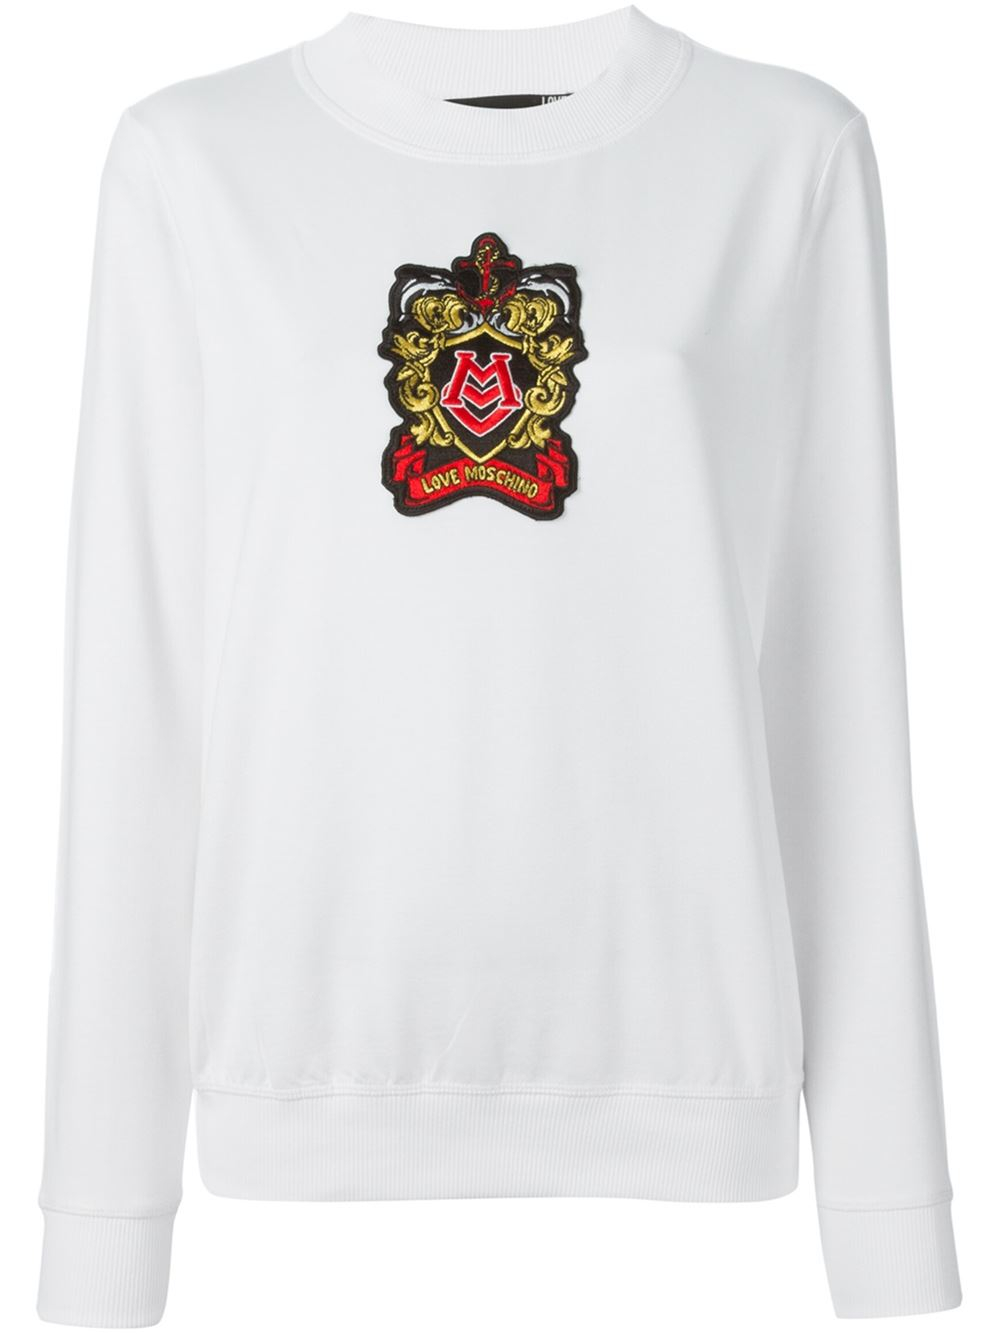 Love moschino Coat Of Arms Logo Embroidered Sweatshirt in White | Lyst